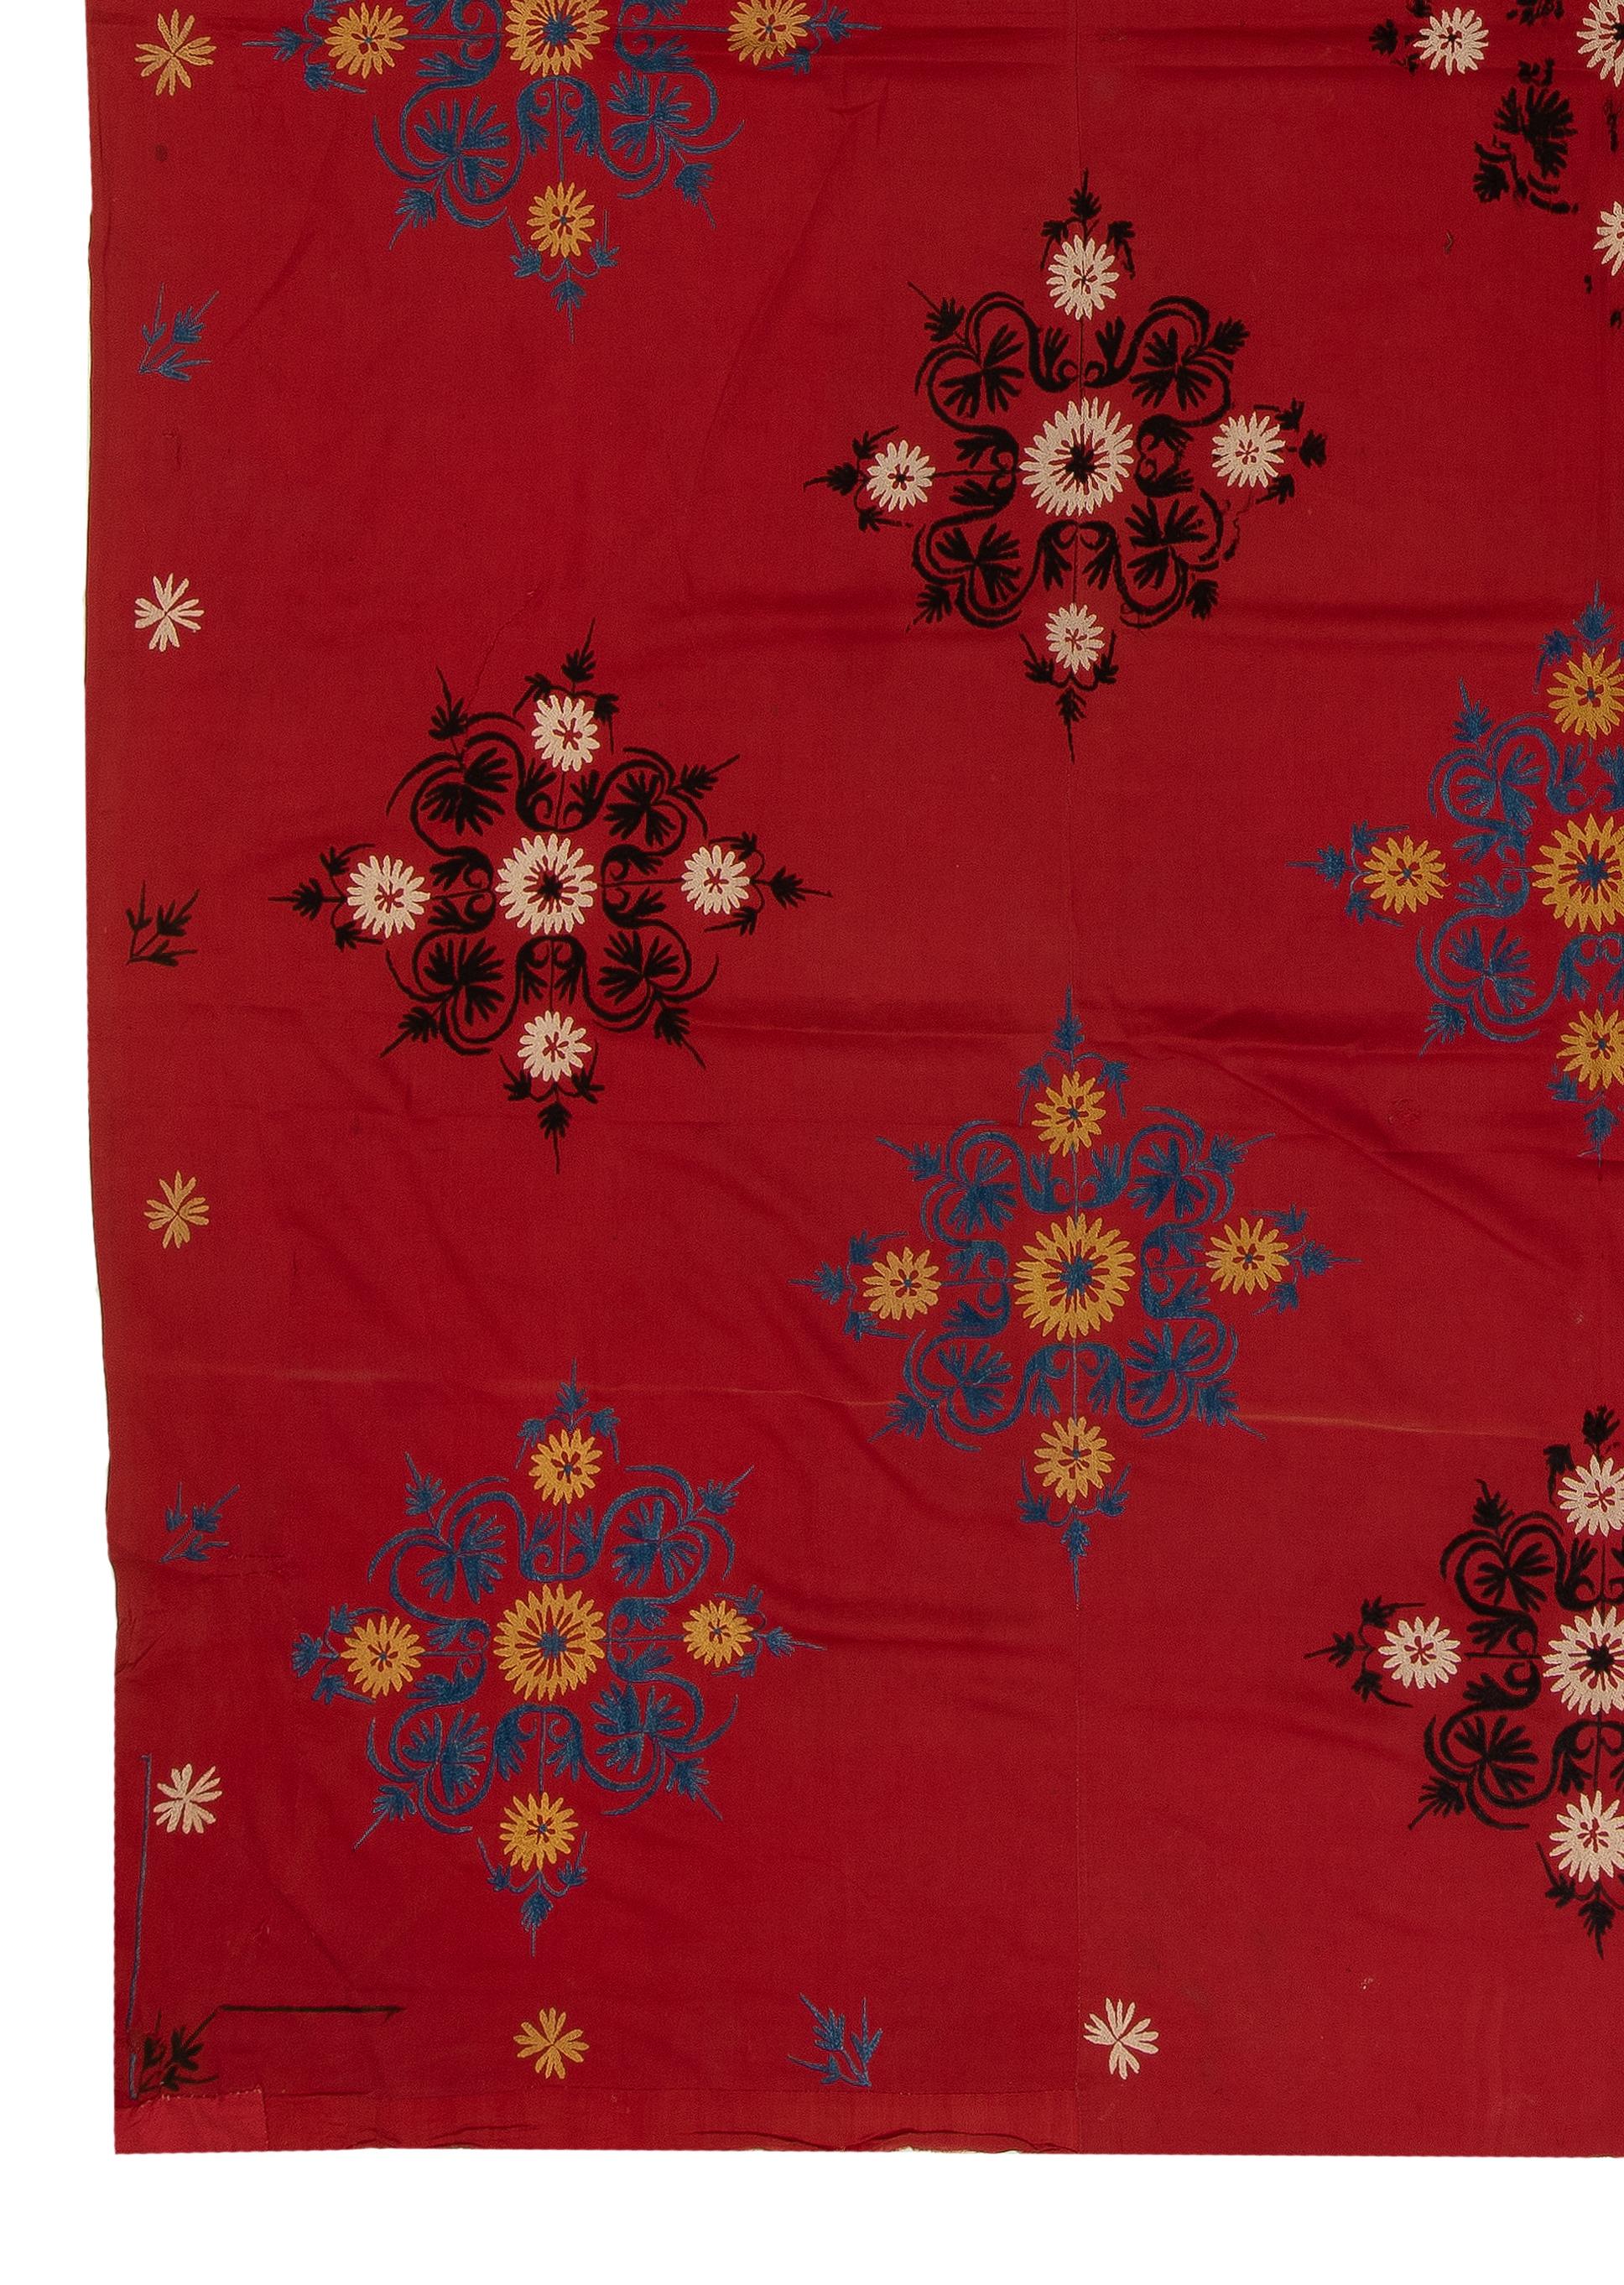 20th Century 6.7x8.7 Ft Hand Embroidered Silk Wall Hanging, Red Bedspread, Suzani Tablecloth For Sale